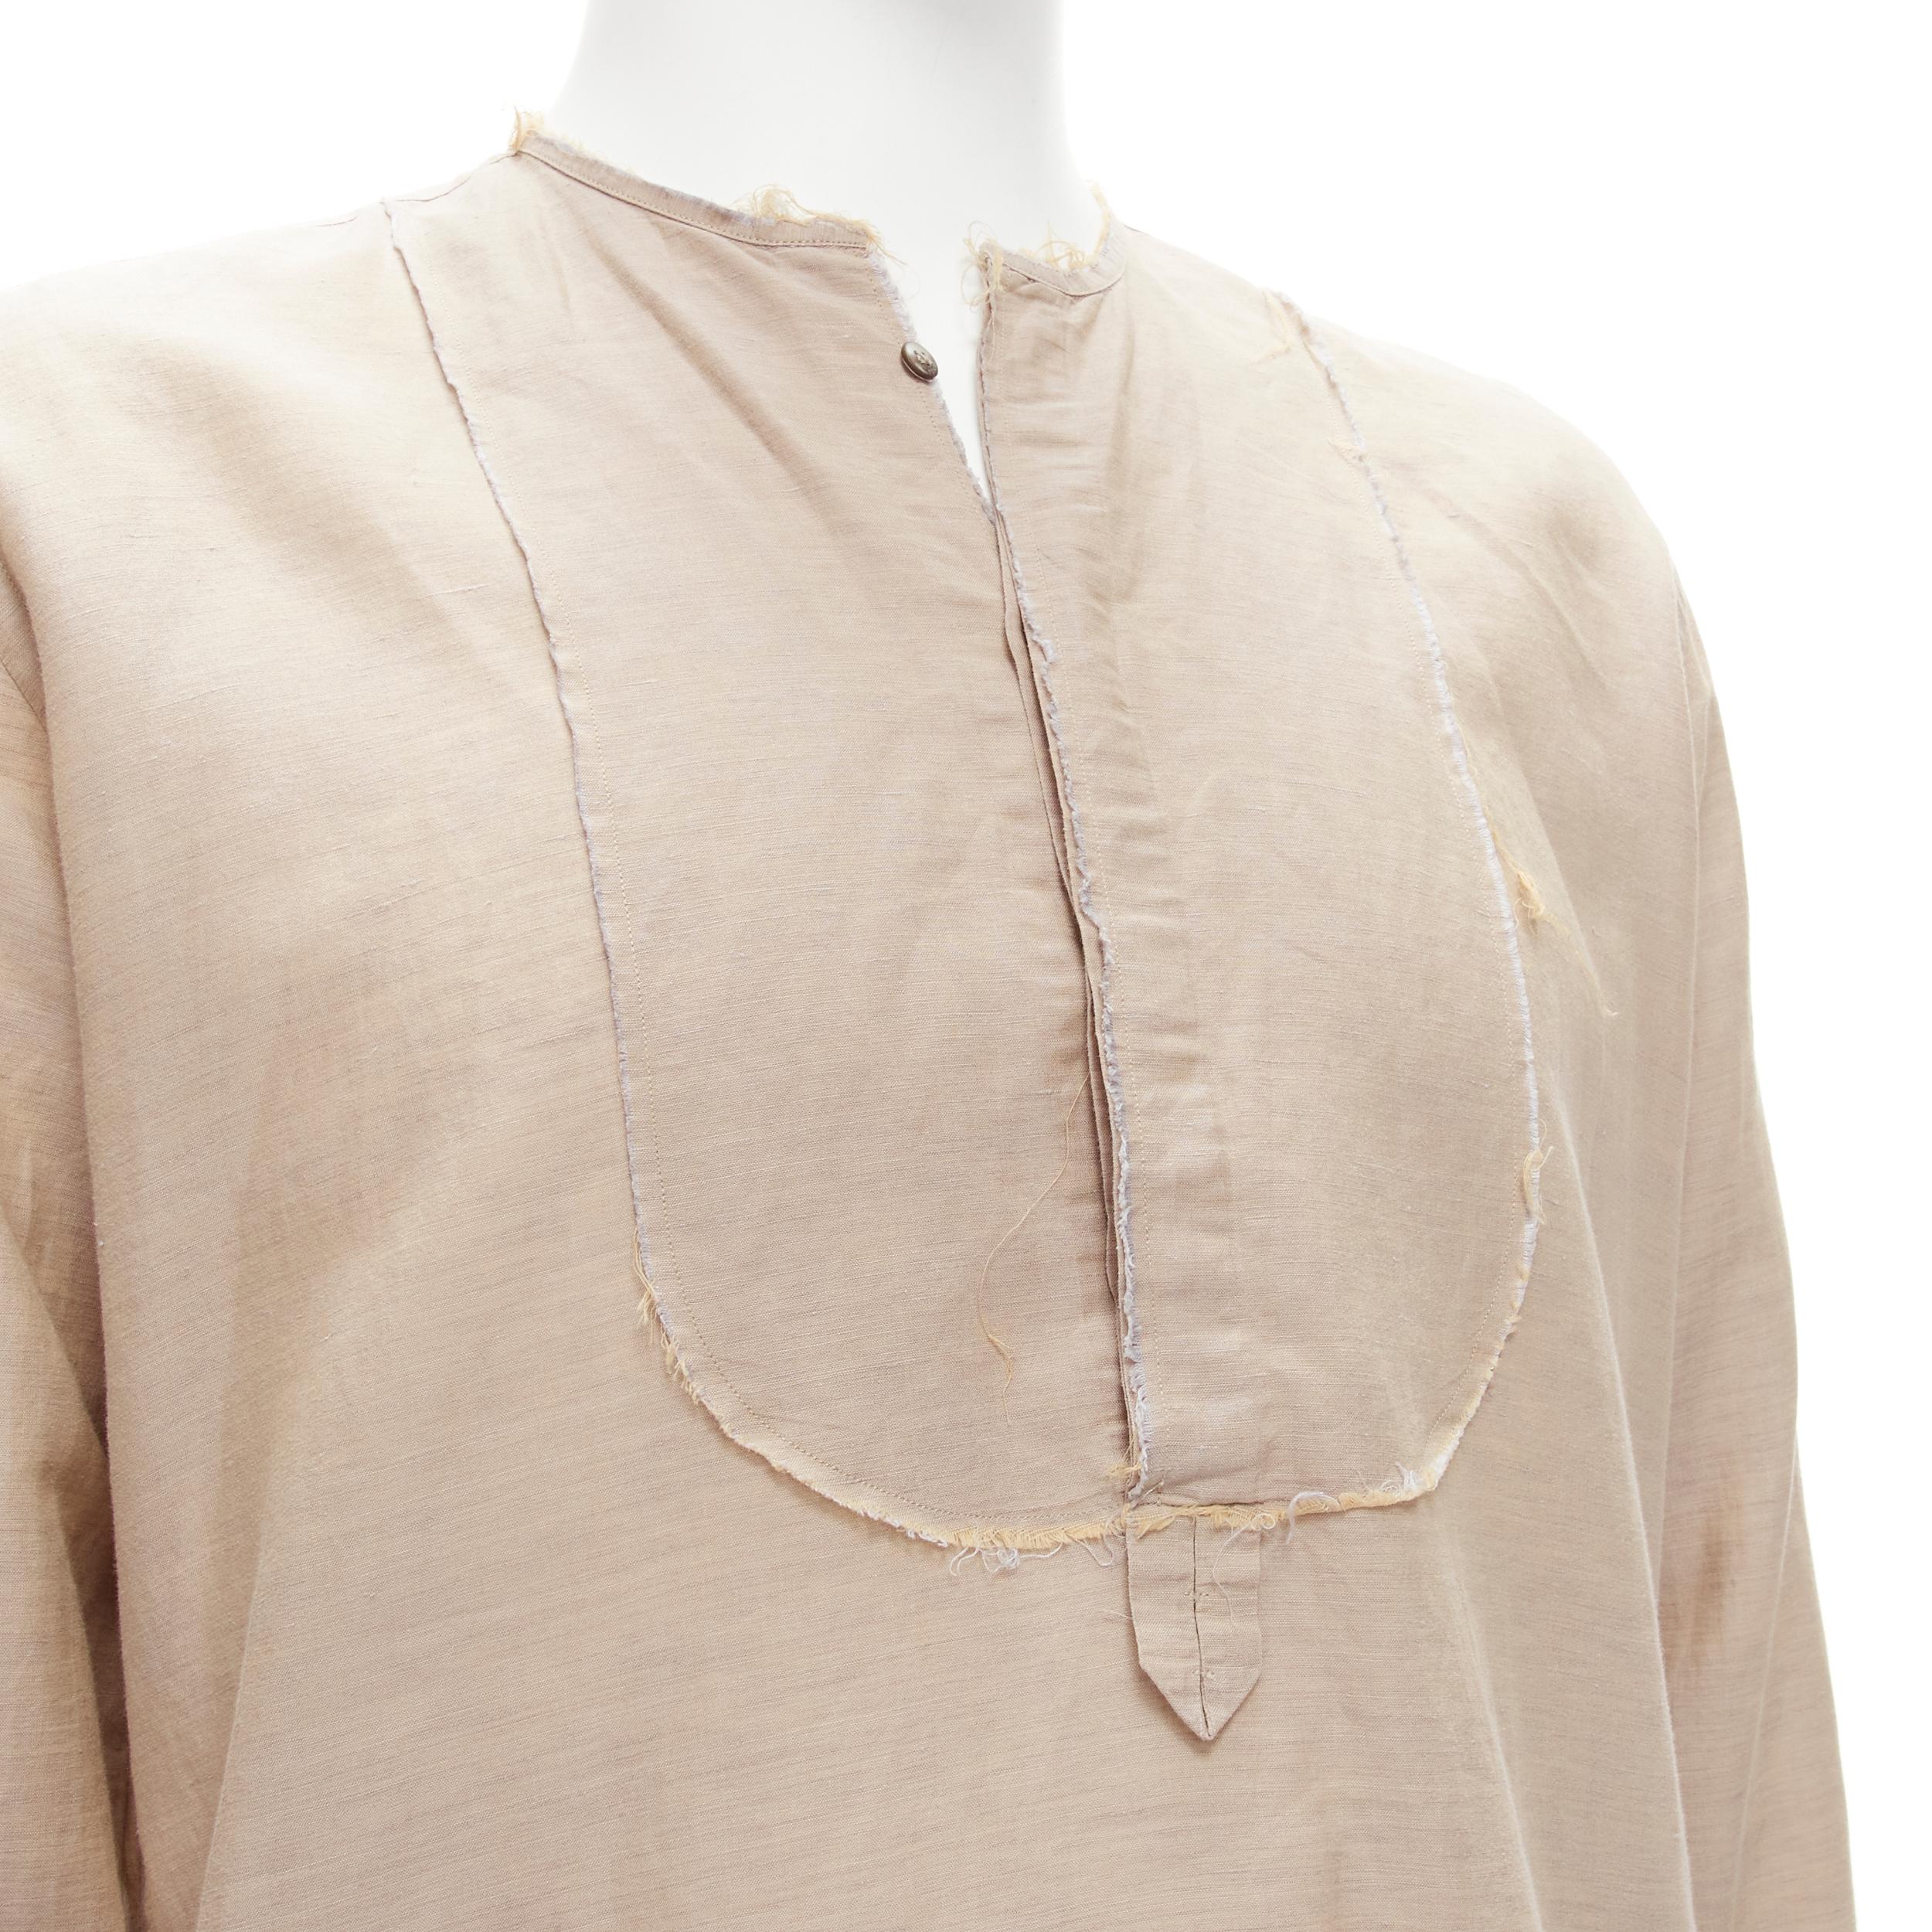 FENDI beige linen cotton raw frayed half button long sleeve shirt EU40 L 
Reference: CNLE/A00173 
Brand: Fendi 
Material: Linen 
Color: Beige 
Pattern: Solid 
Closure: Button 
Extra Detail: Button collar. Raw frayed trim. Dual side pockets. 
Made